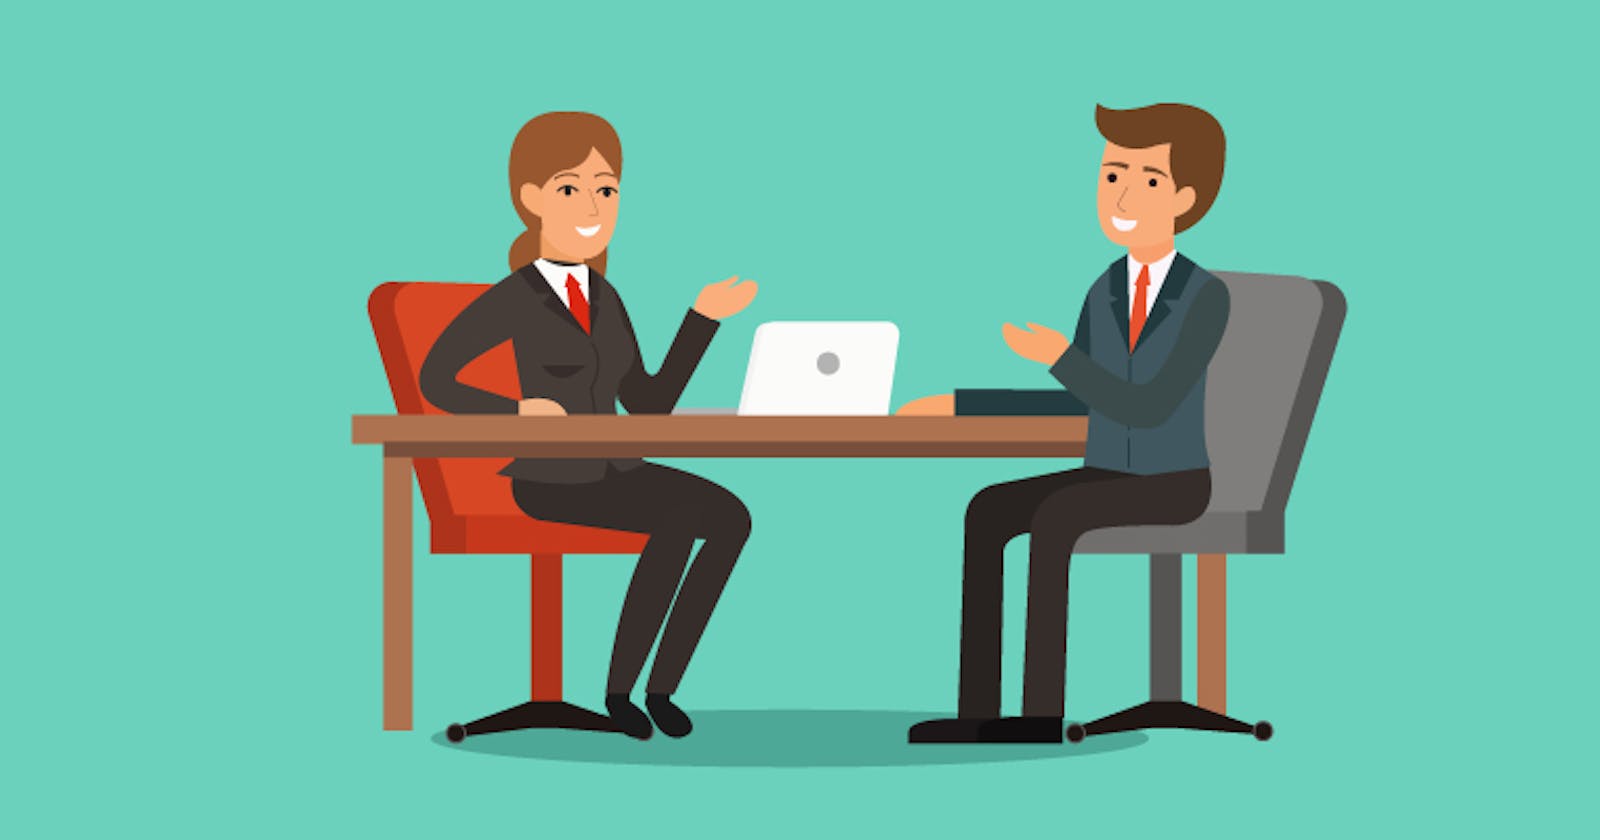 How to prepare to Ace Your HR or MR Interview: 20 Behavioral Interview Questions